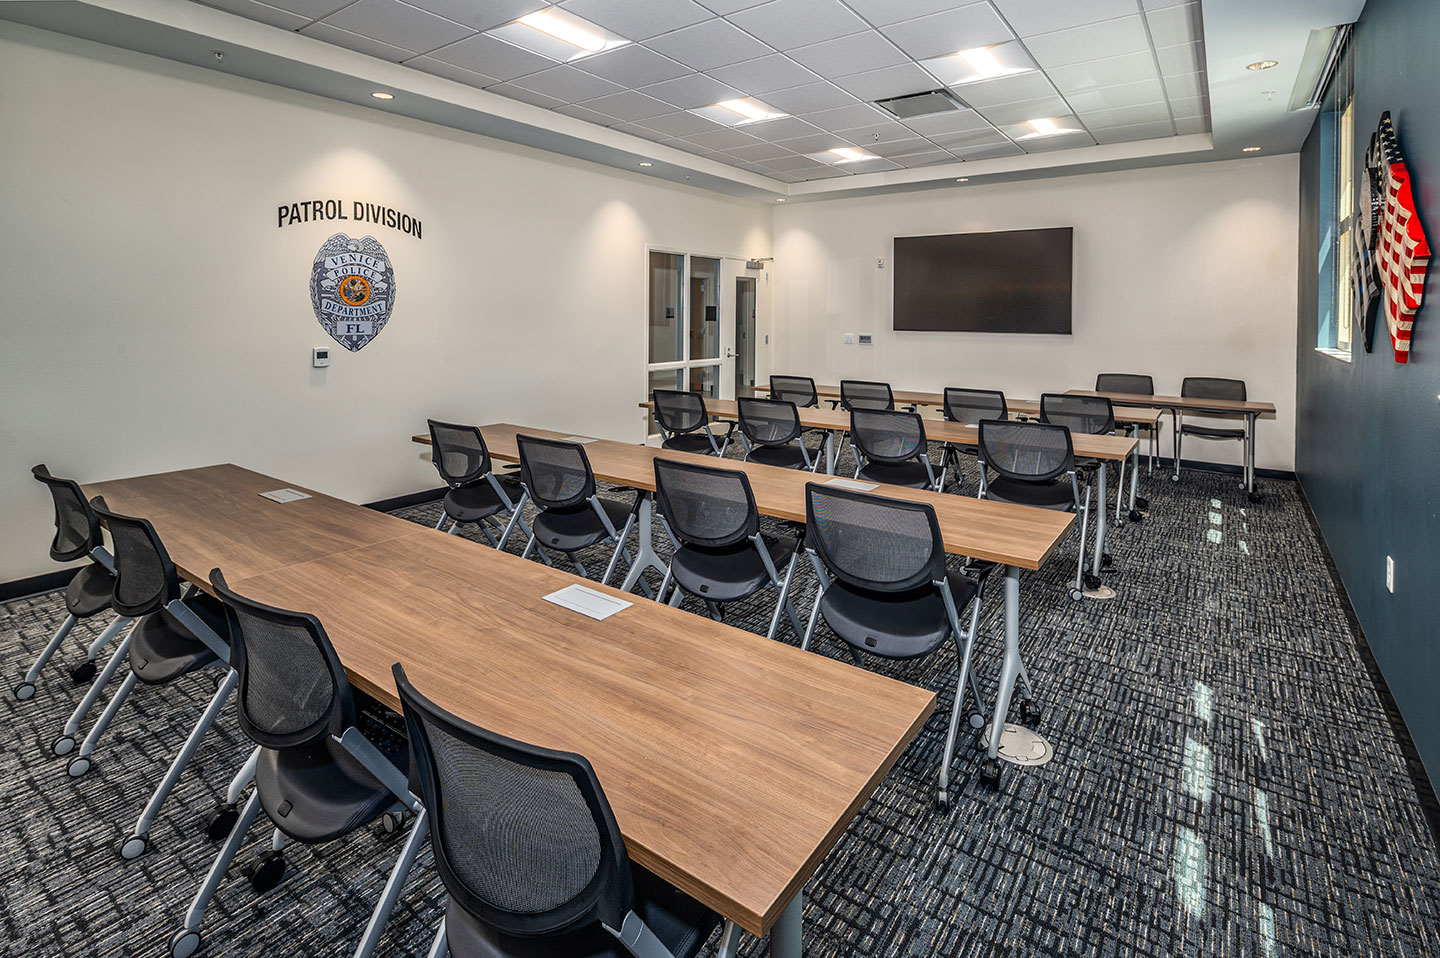 The facility features multipurpose rooms and a media room.